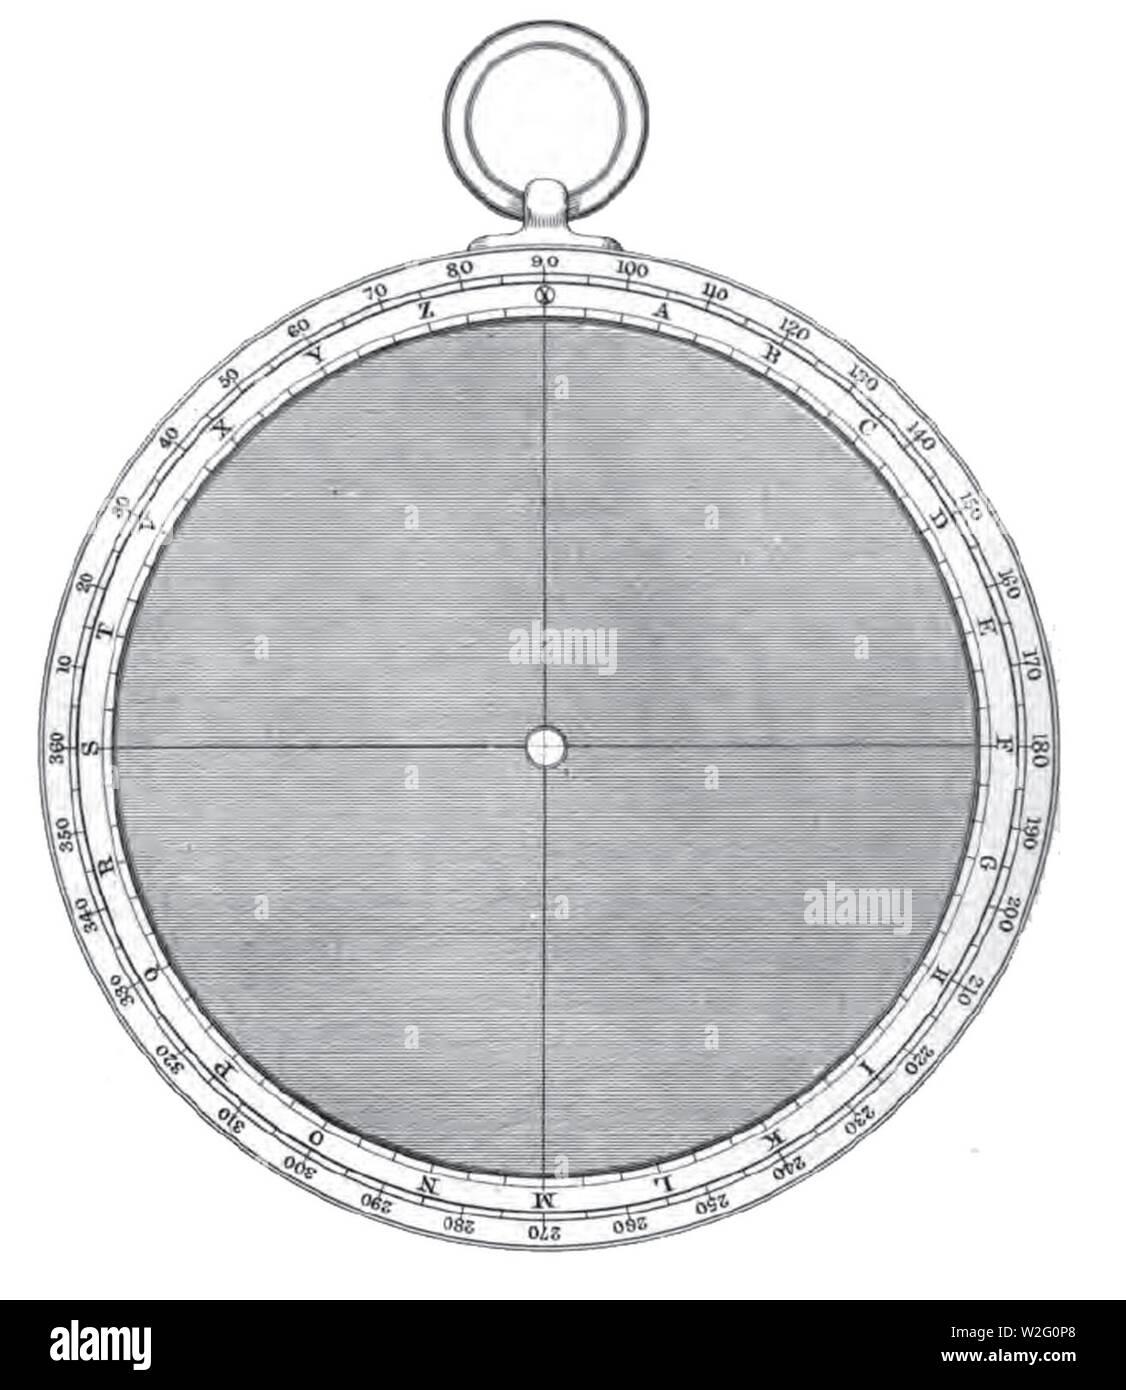 Chaucer astrolabe 2. Stock Photo